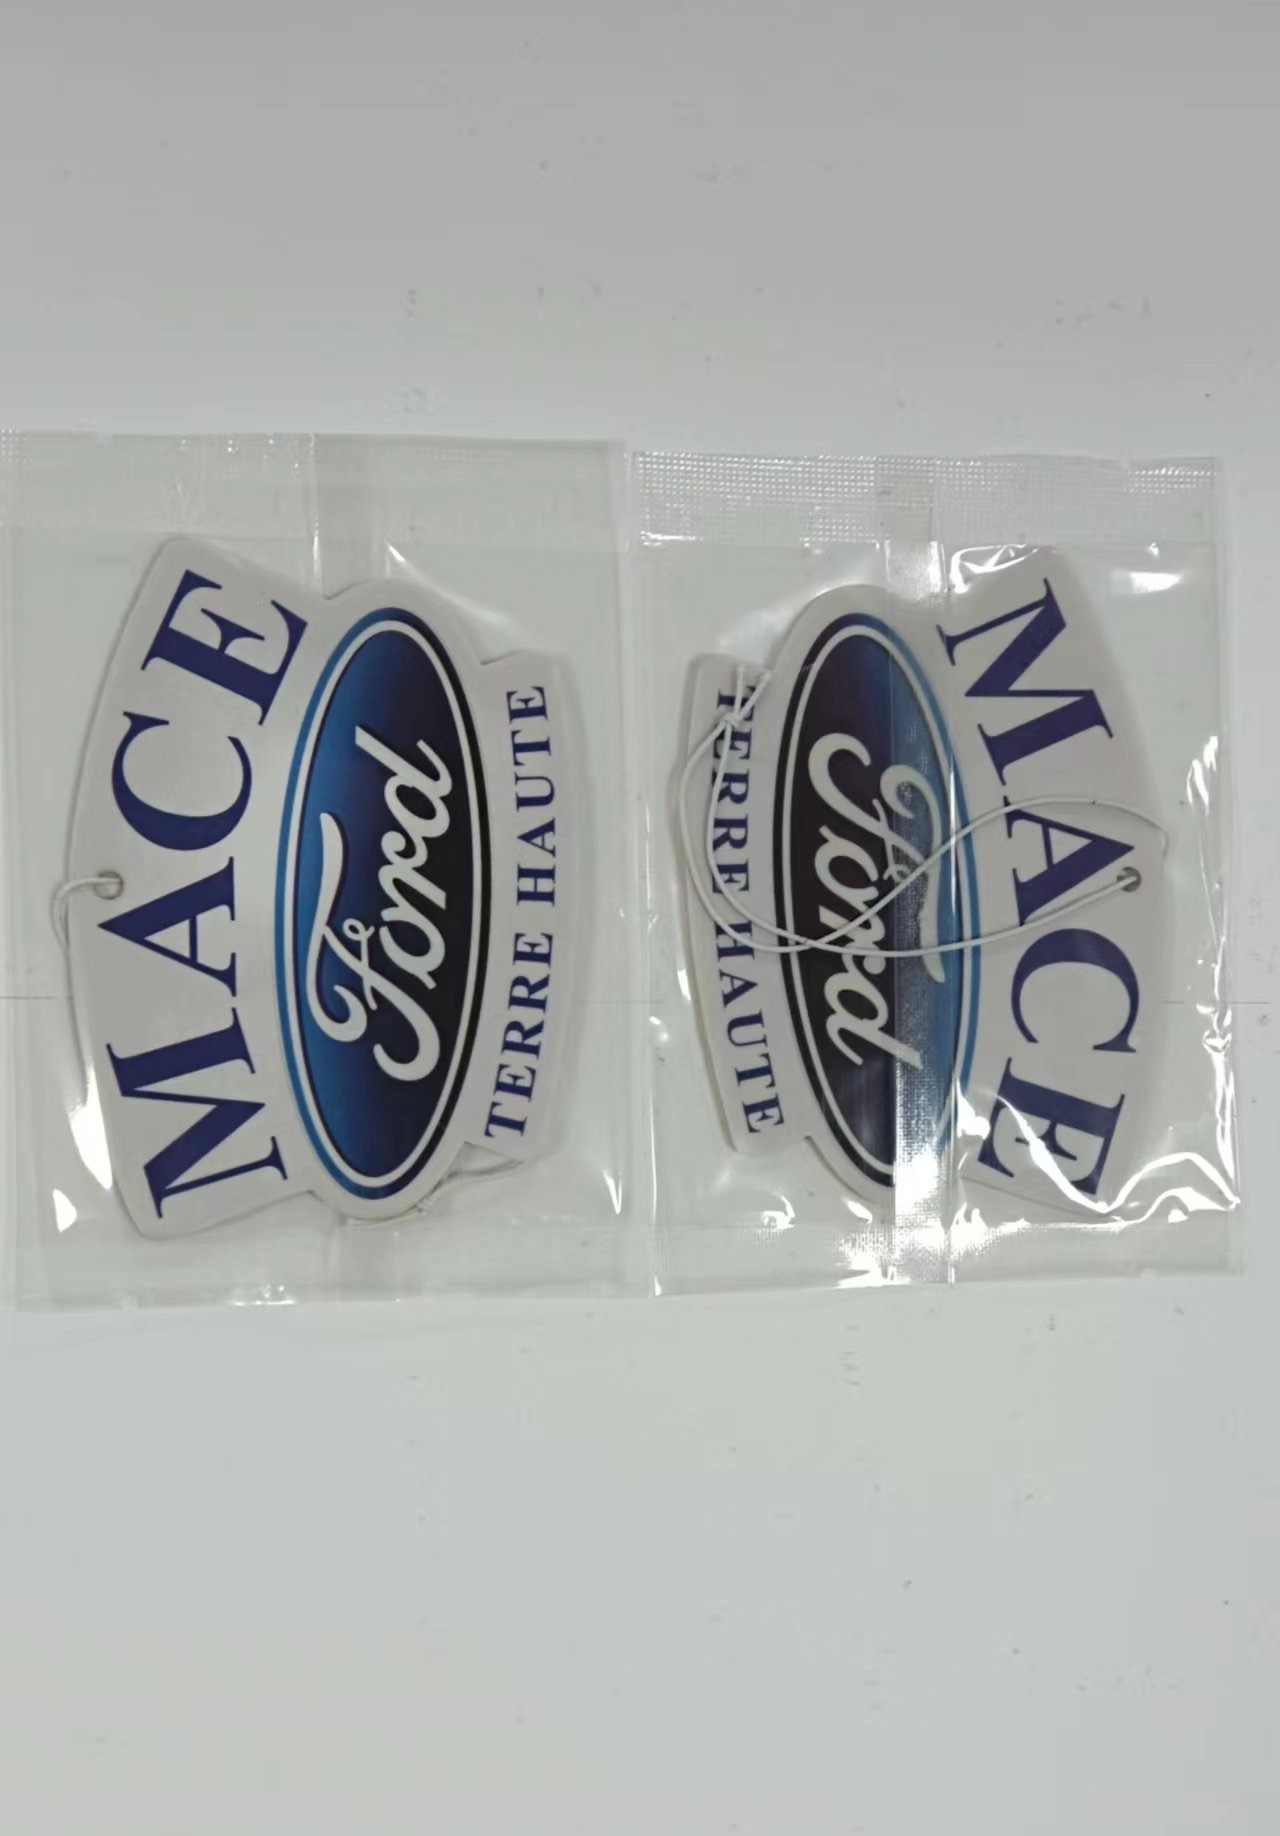 Custom printed air freshener with custom logo and scents 4″ max size